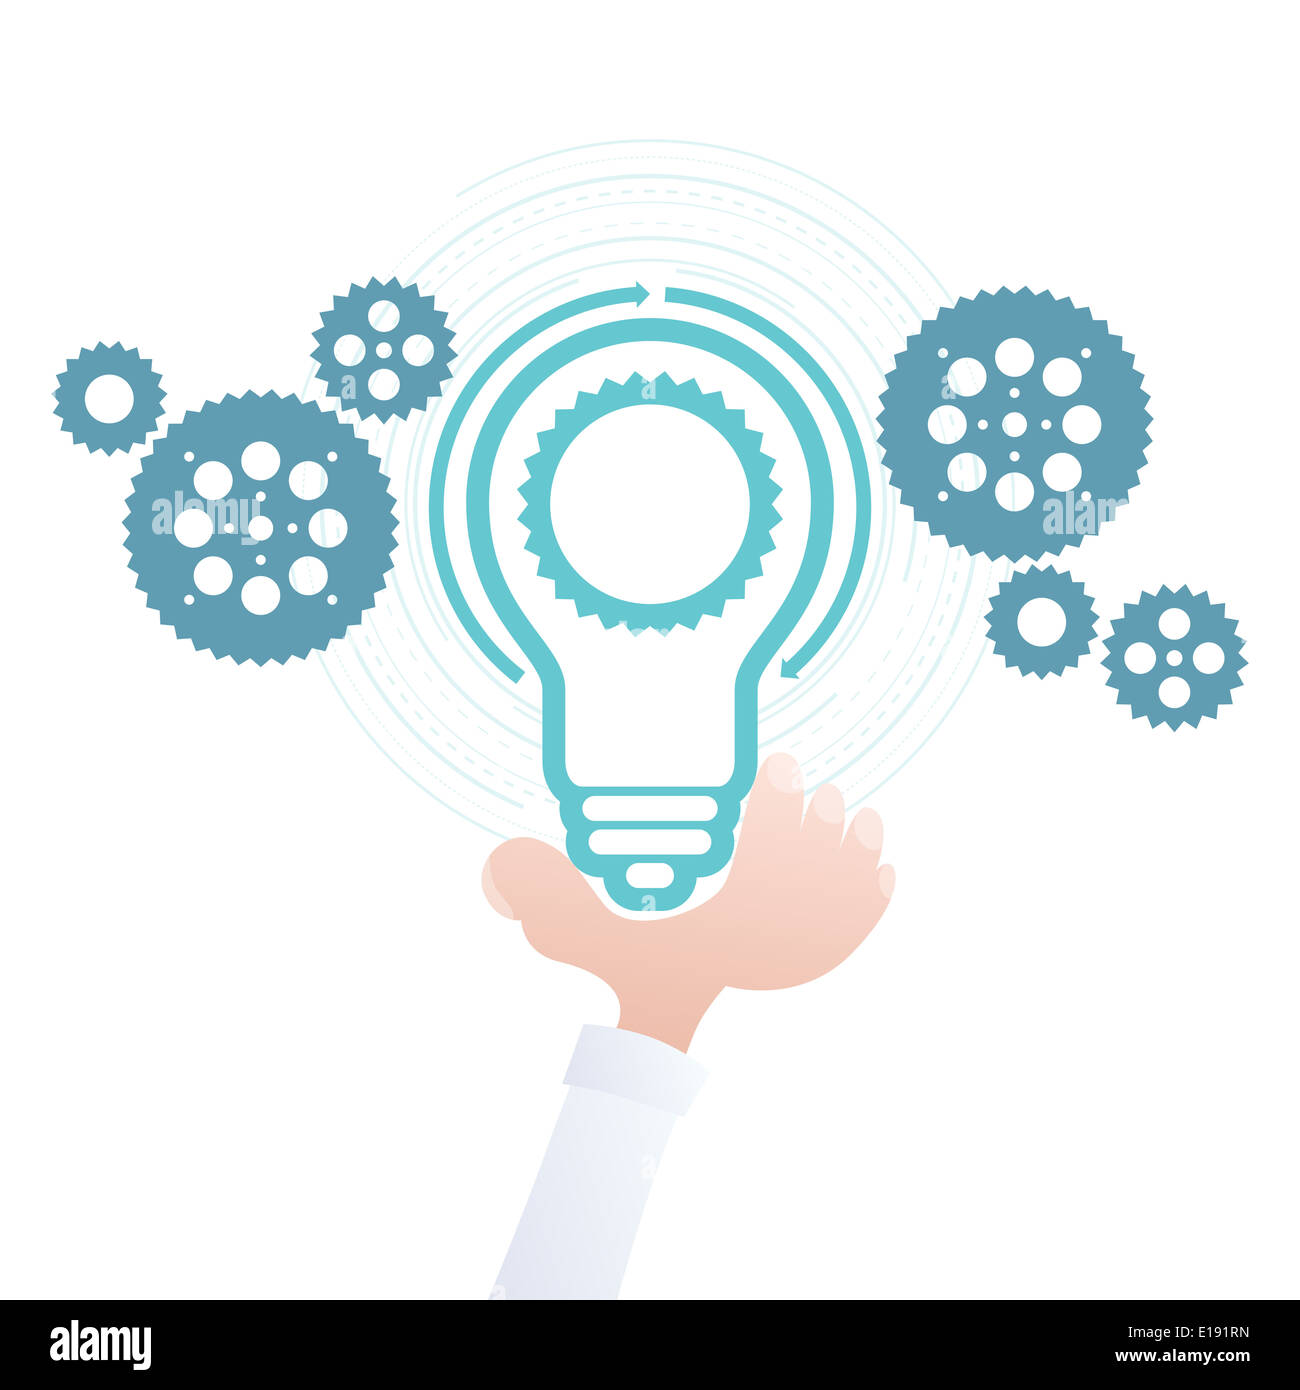 Vector illustration of hand holding a bulb with cogs to illustrate a workable idea. Stock Photo